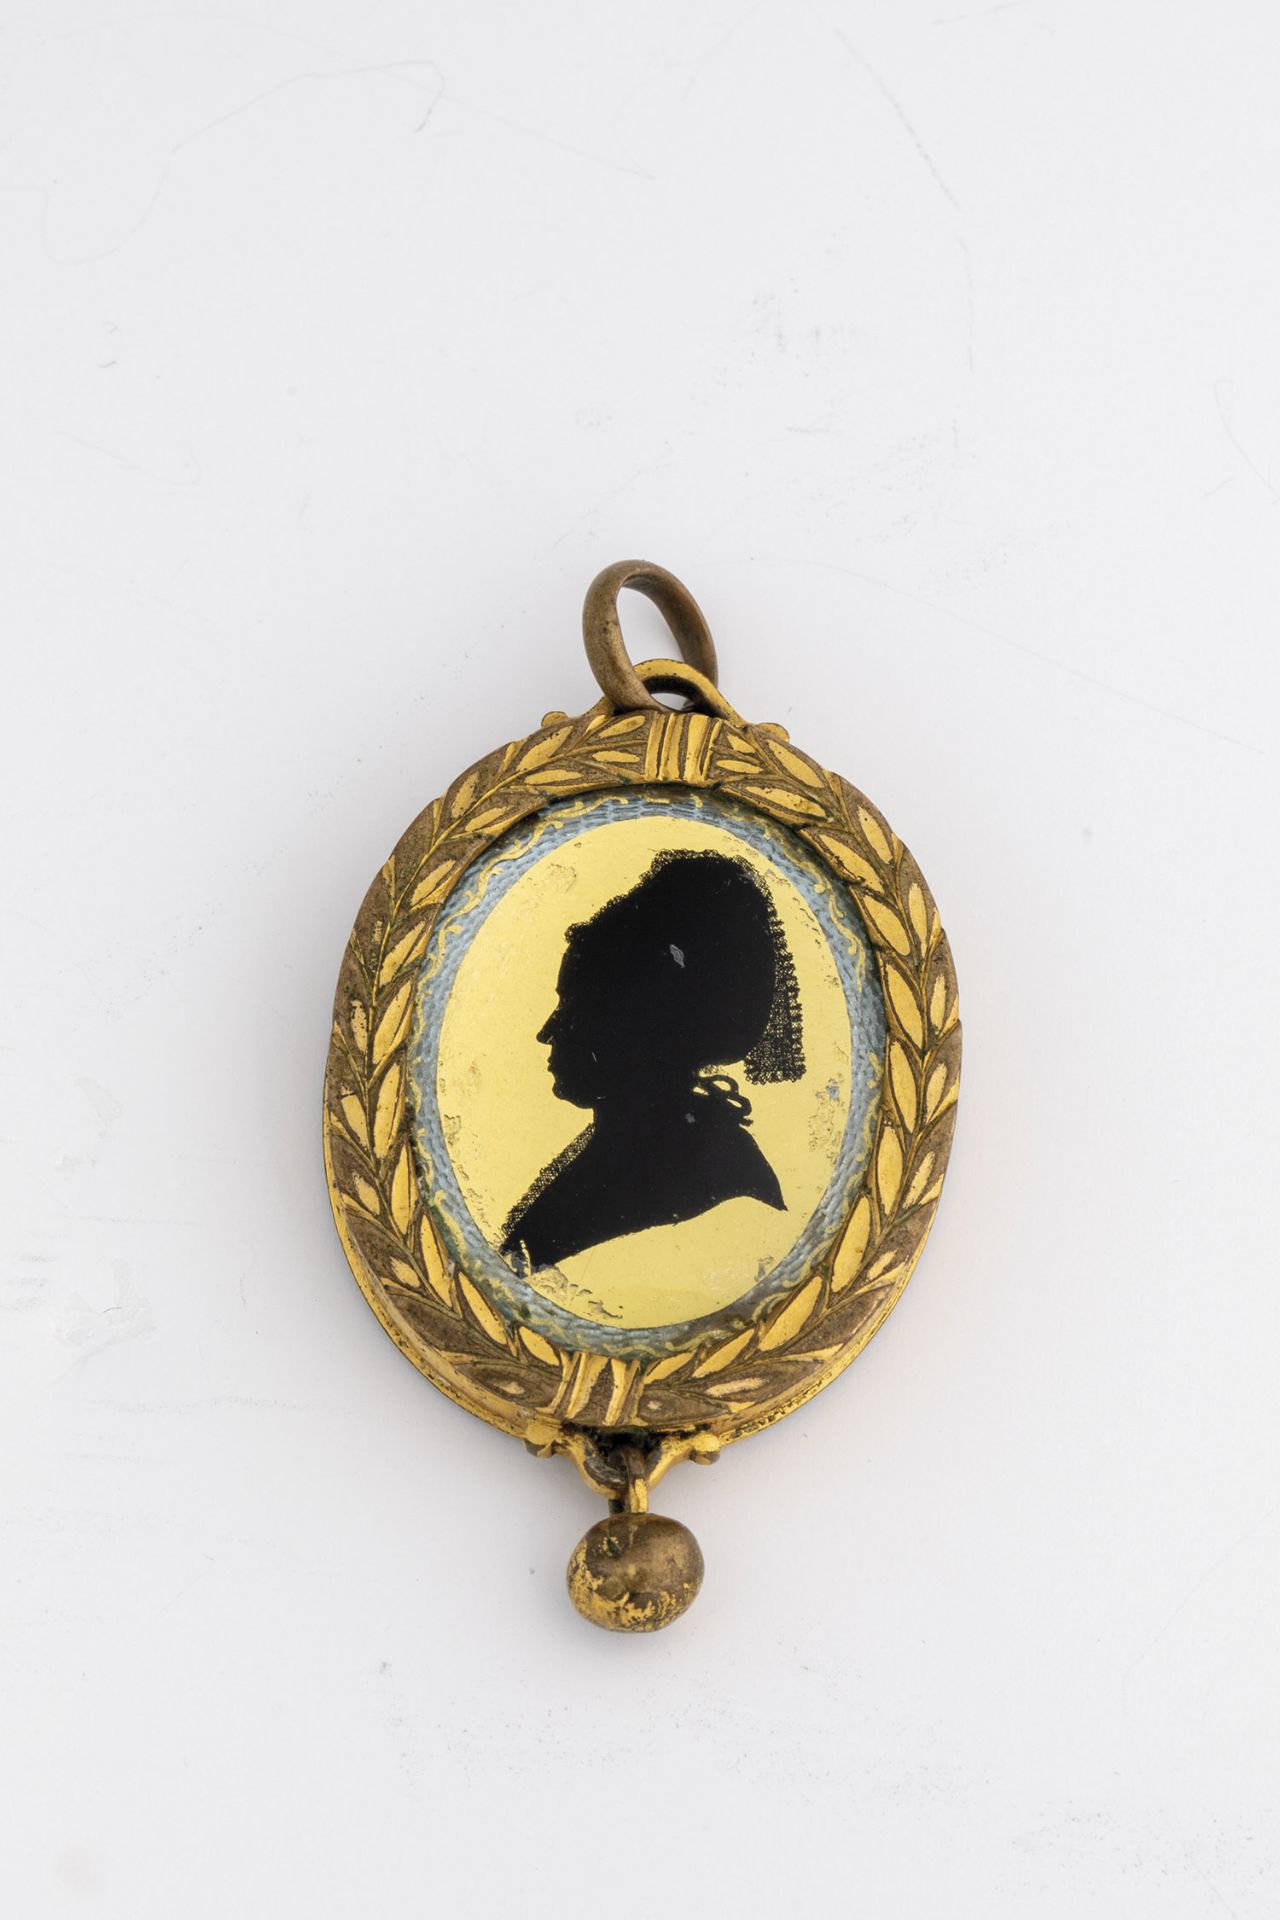 Eglomise pendant with silhouette portraits Signed and dated ''Brecht fec. 1789'' Profile - Image 2 of 2